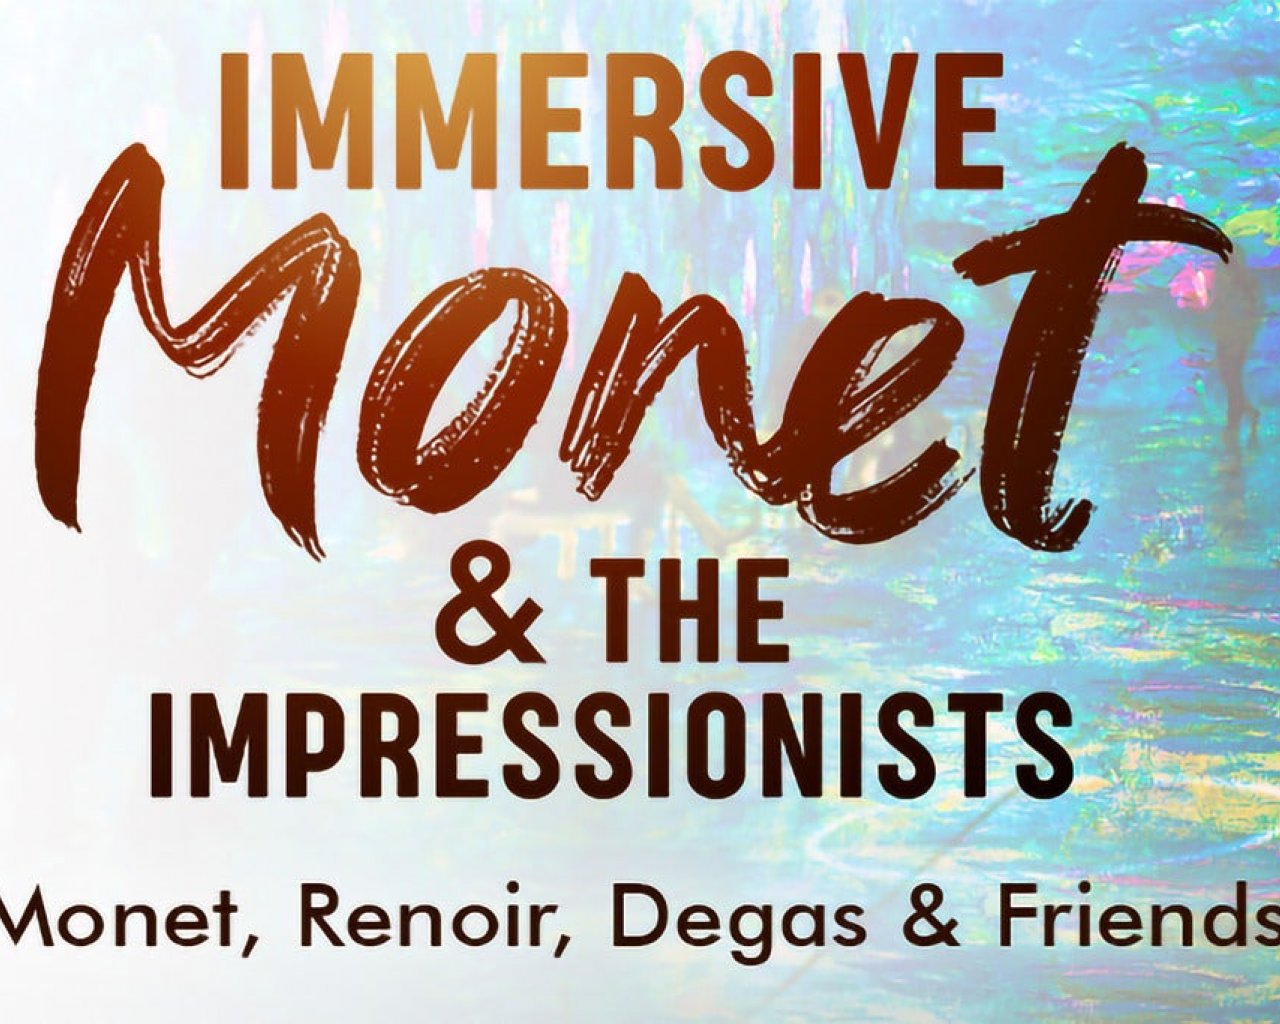 Immersive Monet and the Impressionists - Chicago